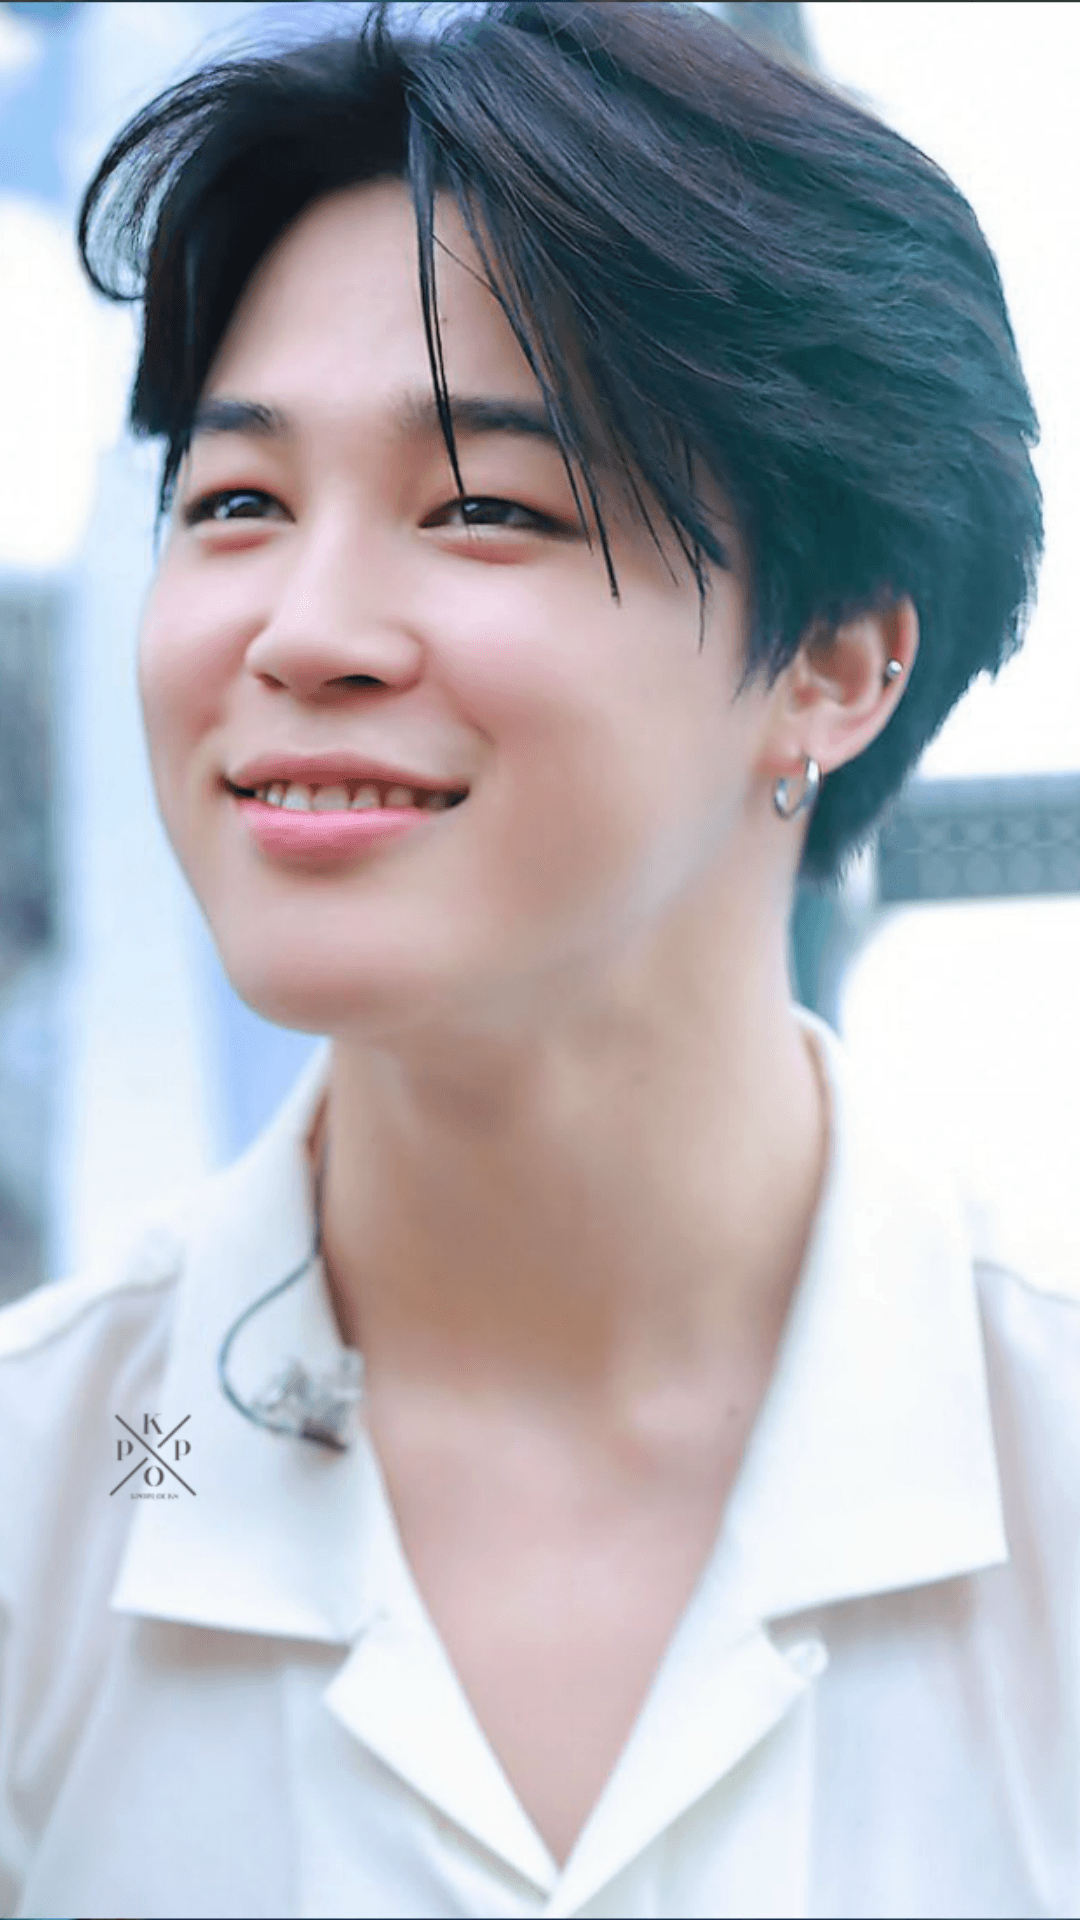 Do you think BTS's Jimin looks like ATEEZ's Wooyoung? | KProfiles Forum